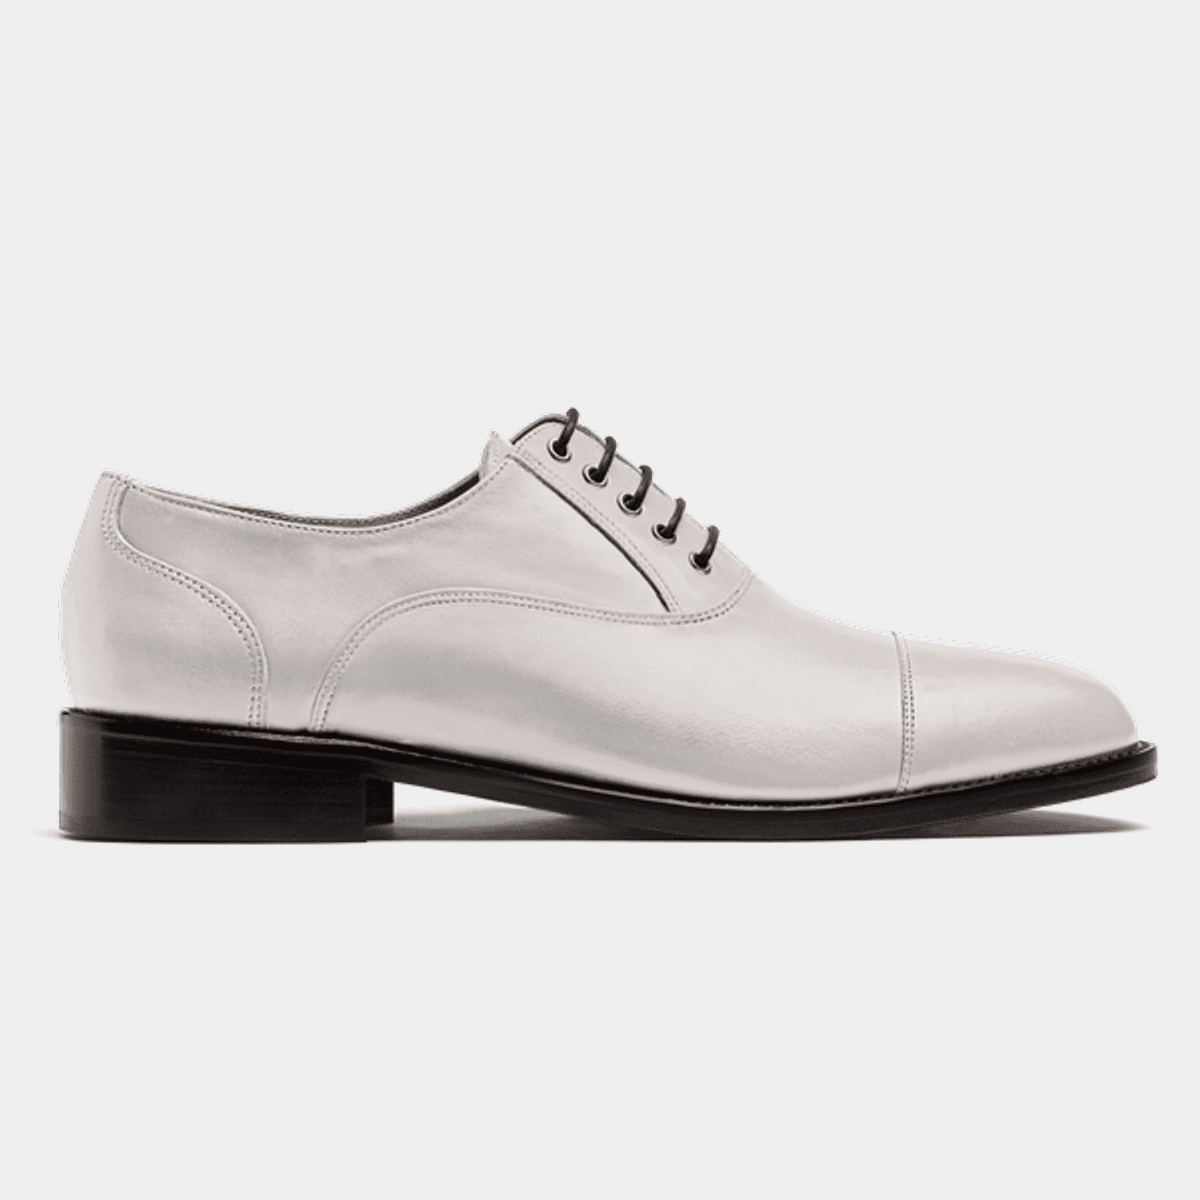 Cap toe Oxford shoes in white leather